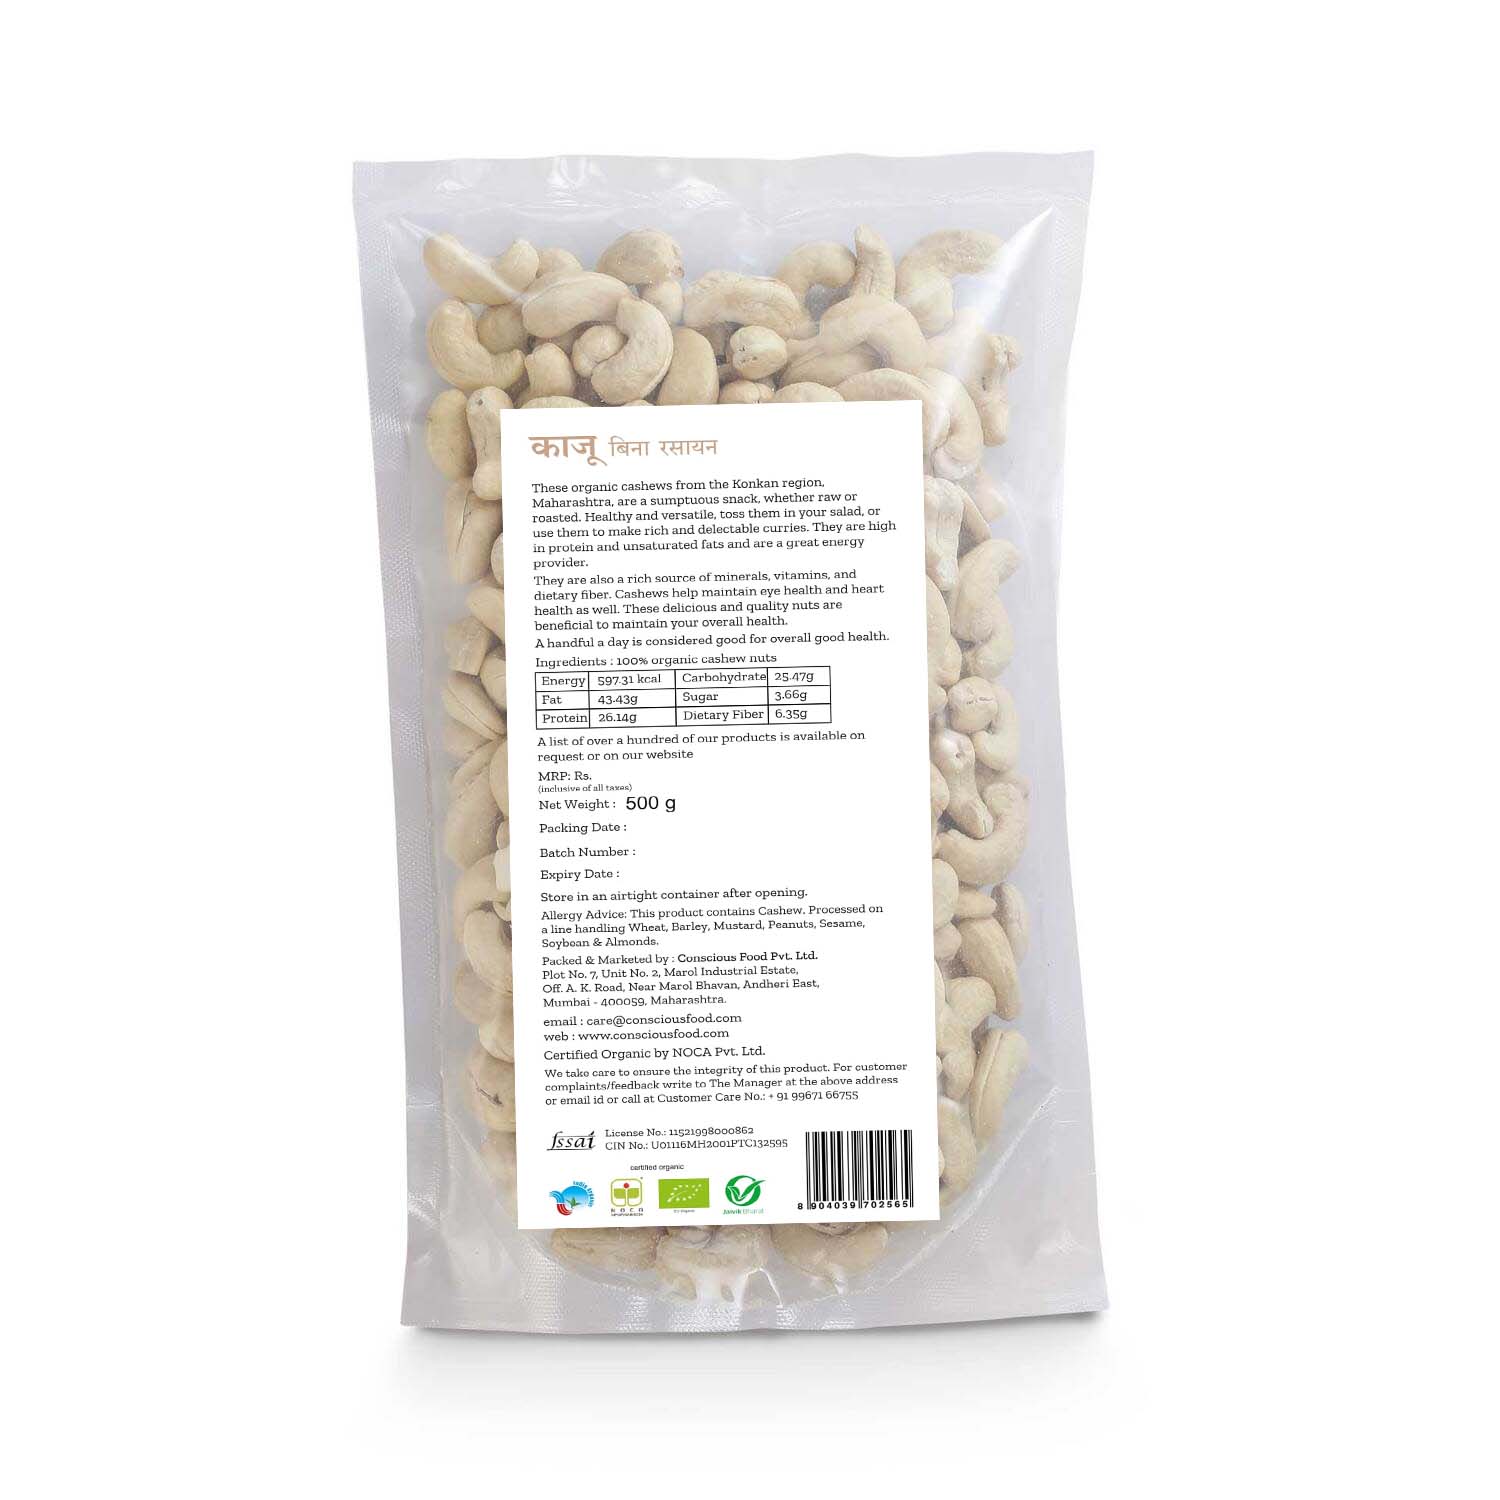 Product: Conscious Food Cashew